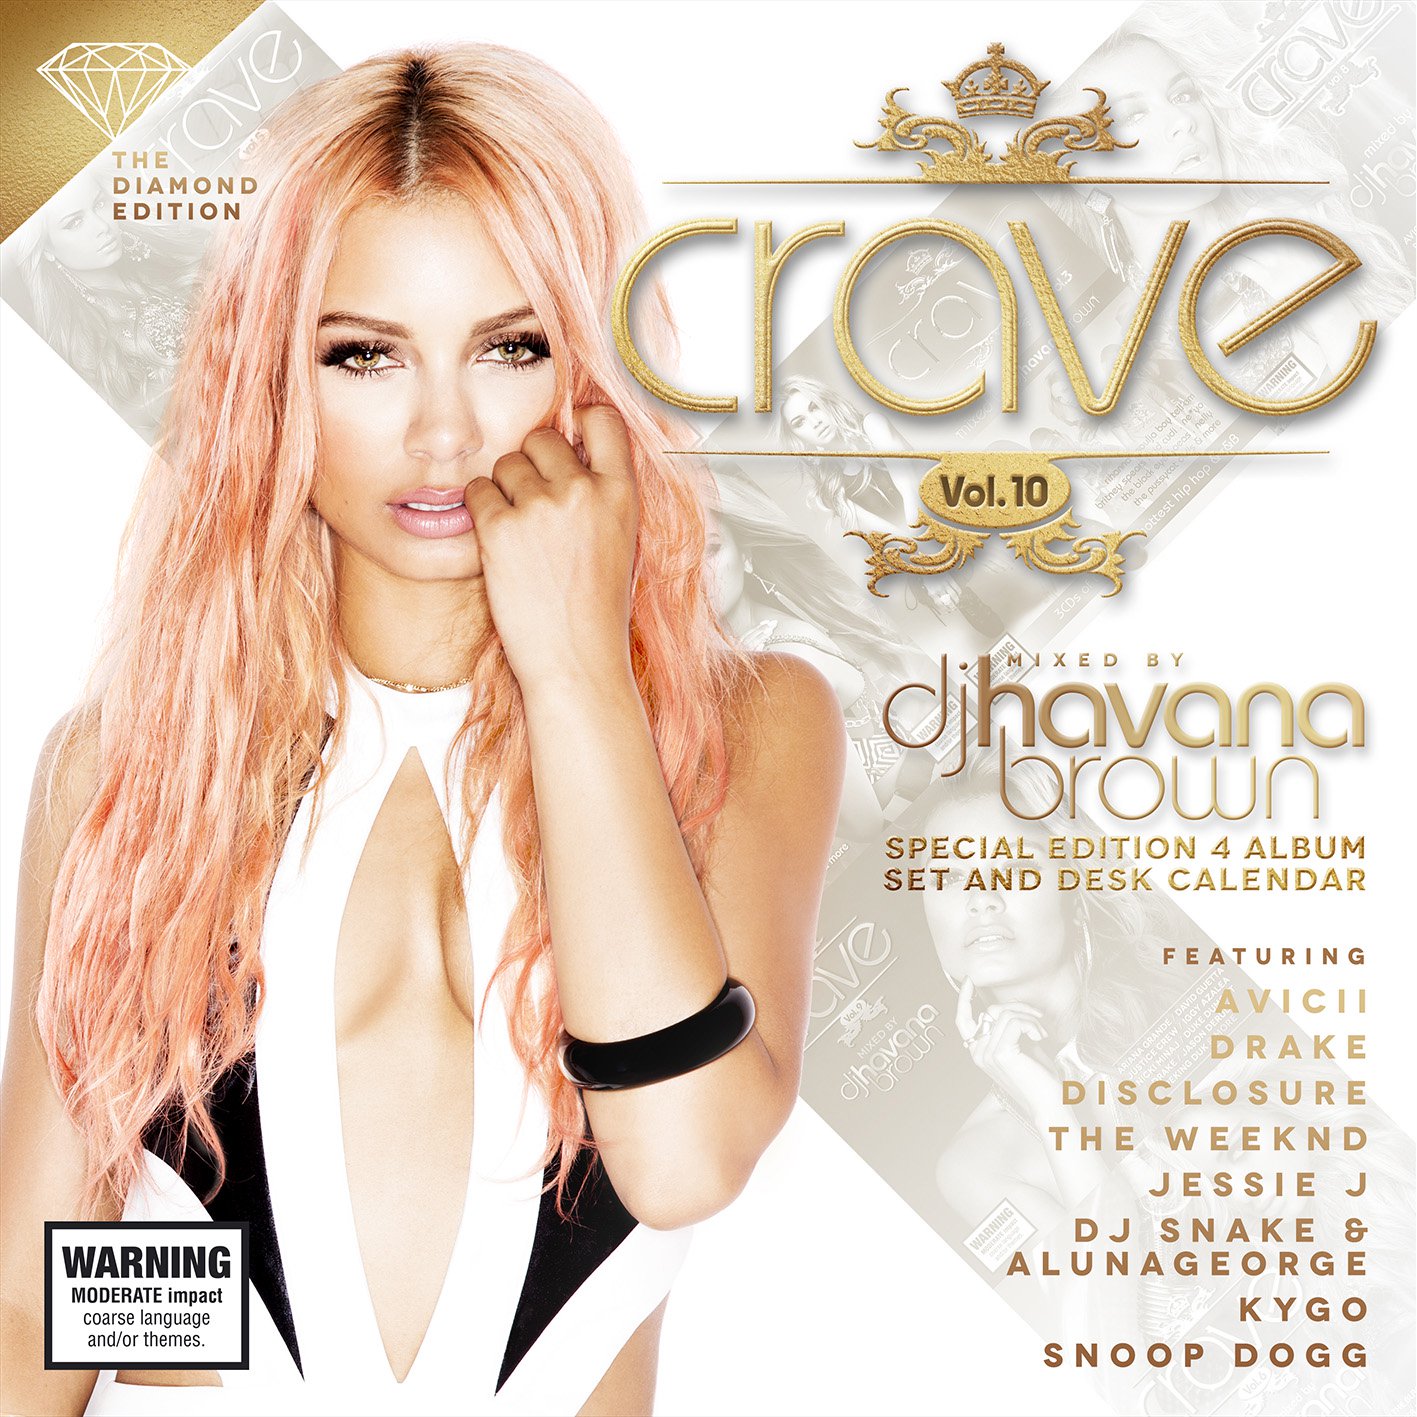 Havana Brown Crave Vol.10 The Diamond Edition Cover by Los Angeles Fashion Photographer James Hickey